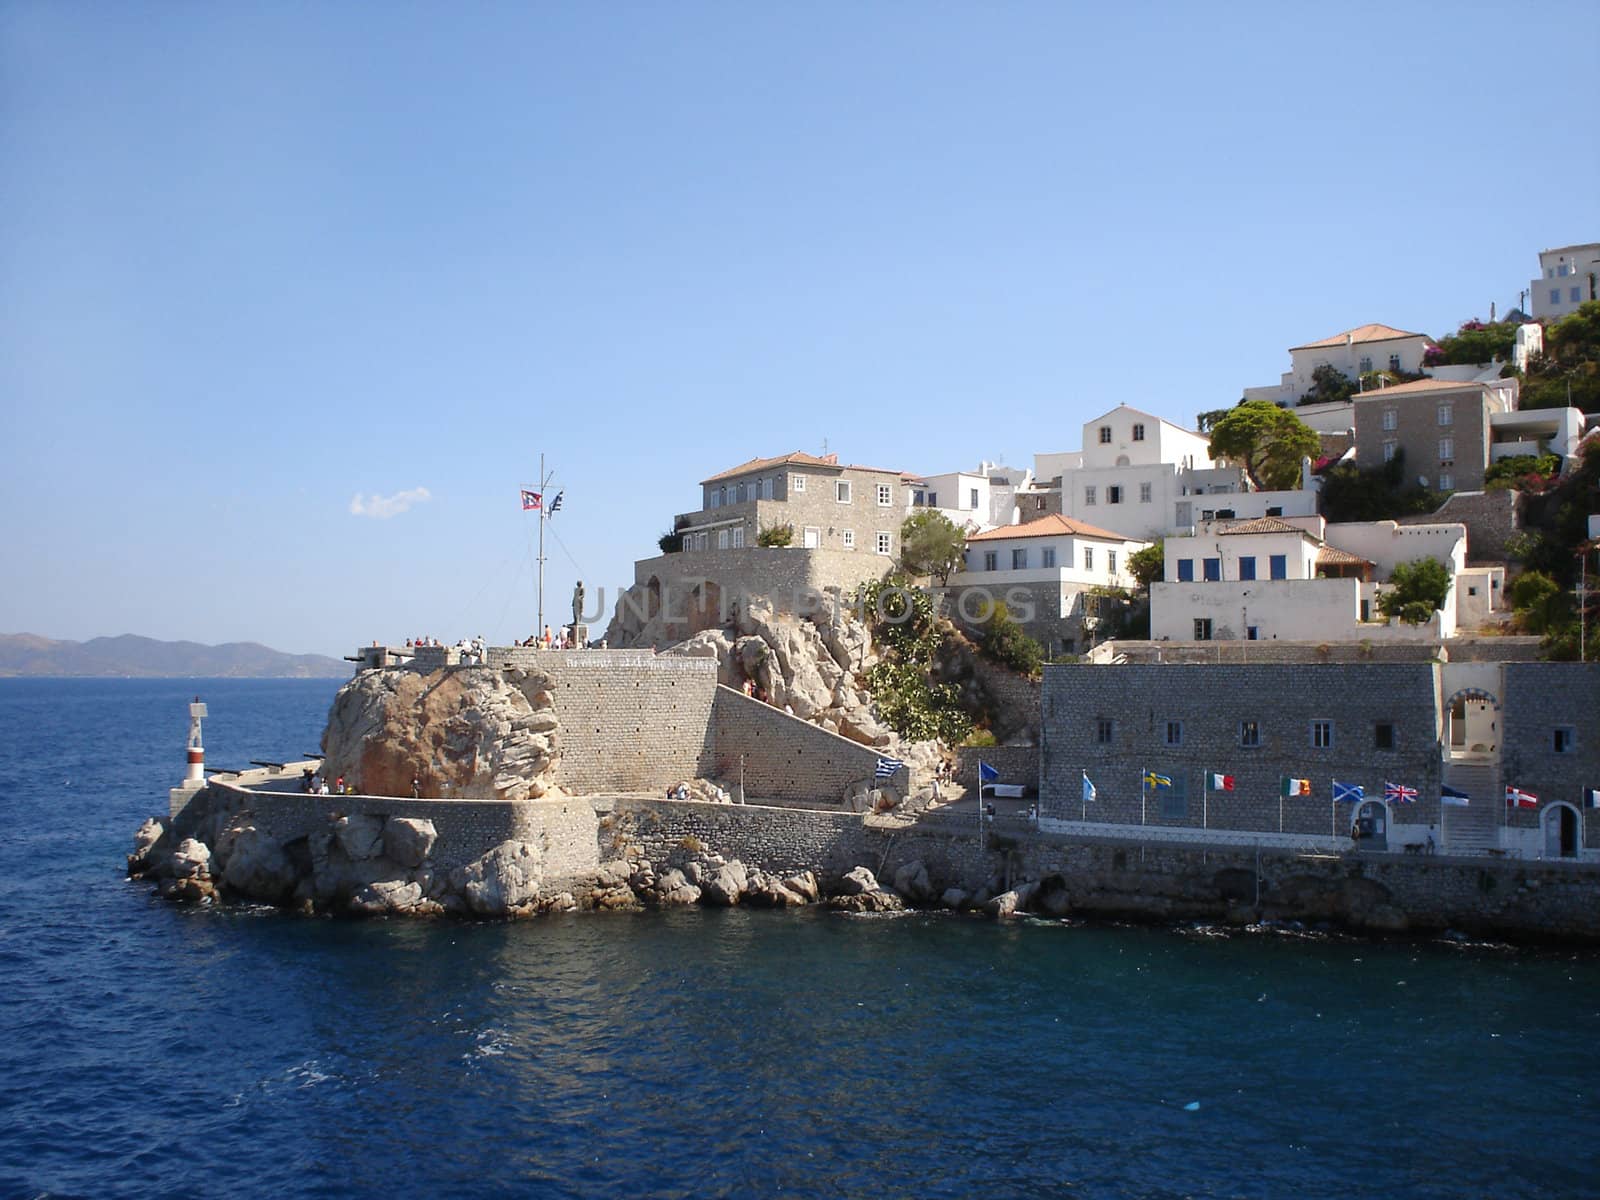 Hydra bastions with cannons in harbor                               